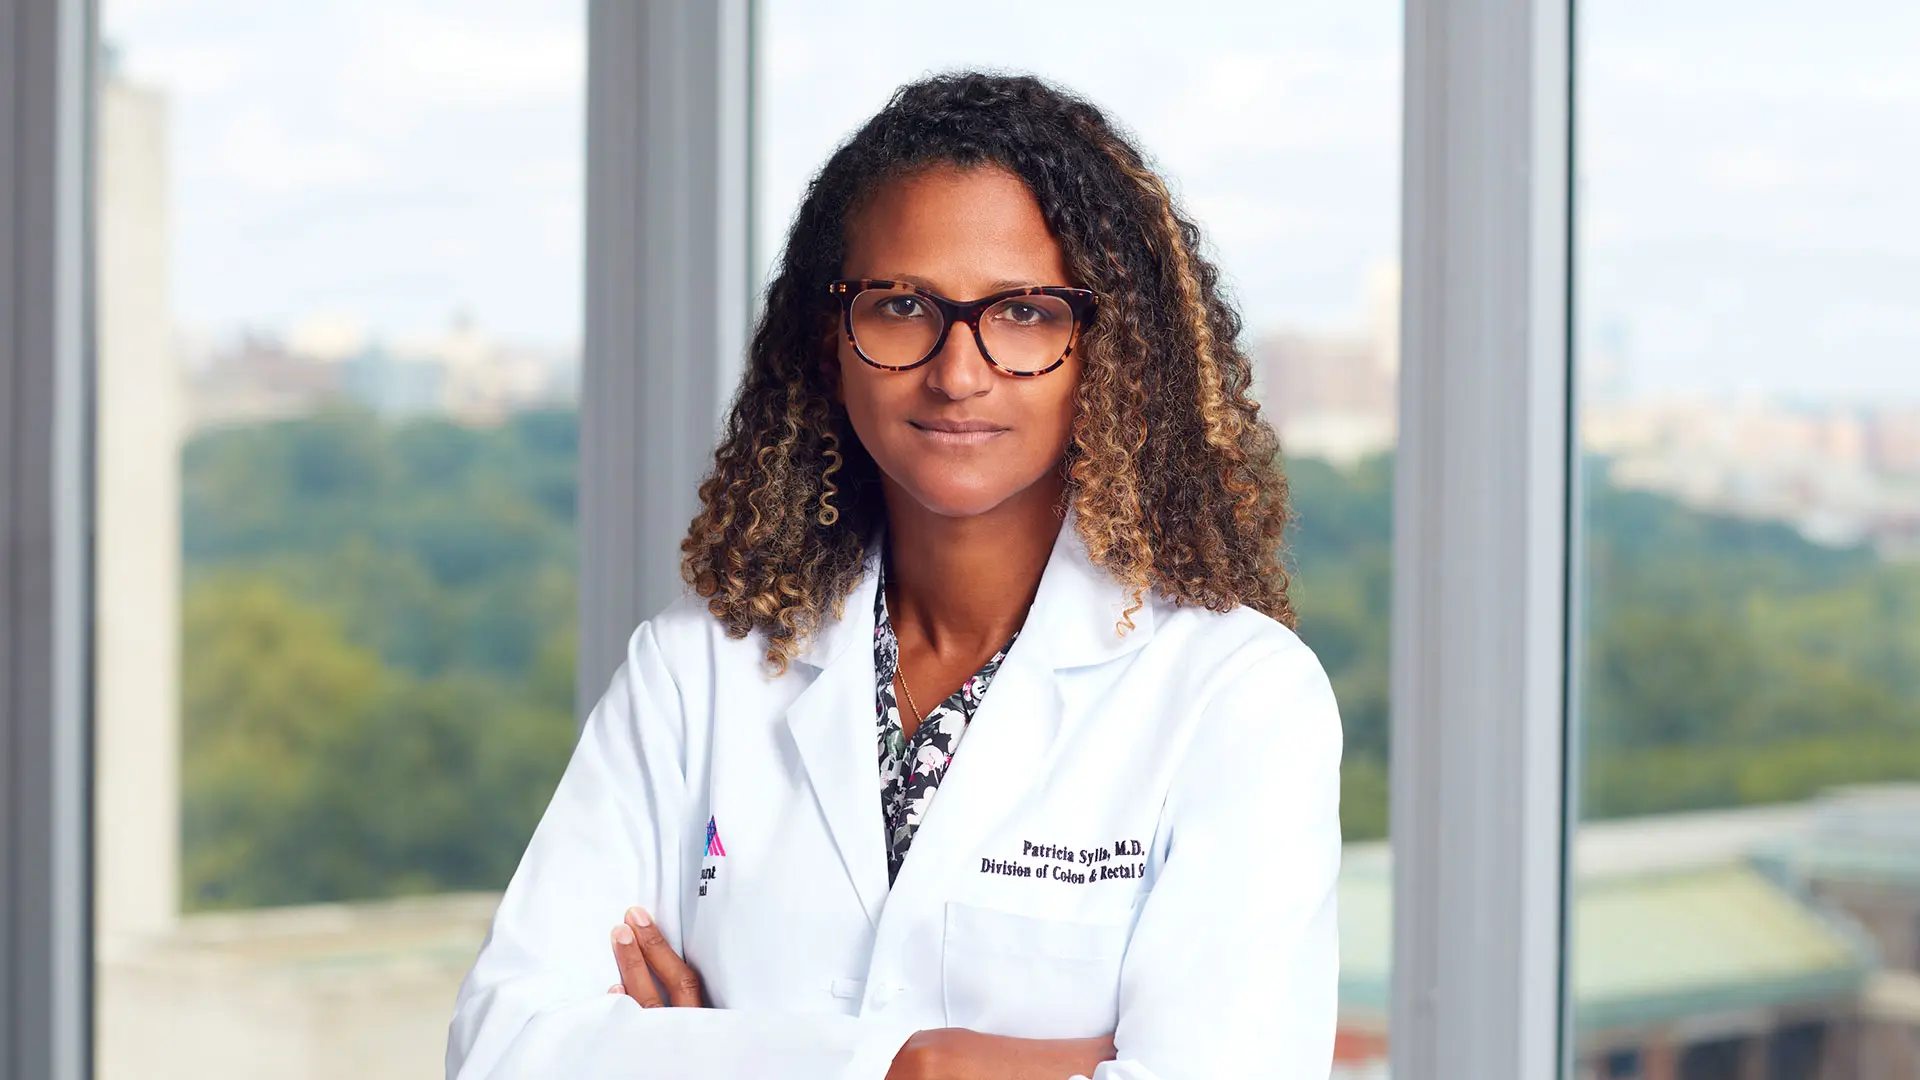 Patricia Sylla, MD, is the new Chief of the Division of Colorectal Surgery.